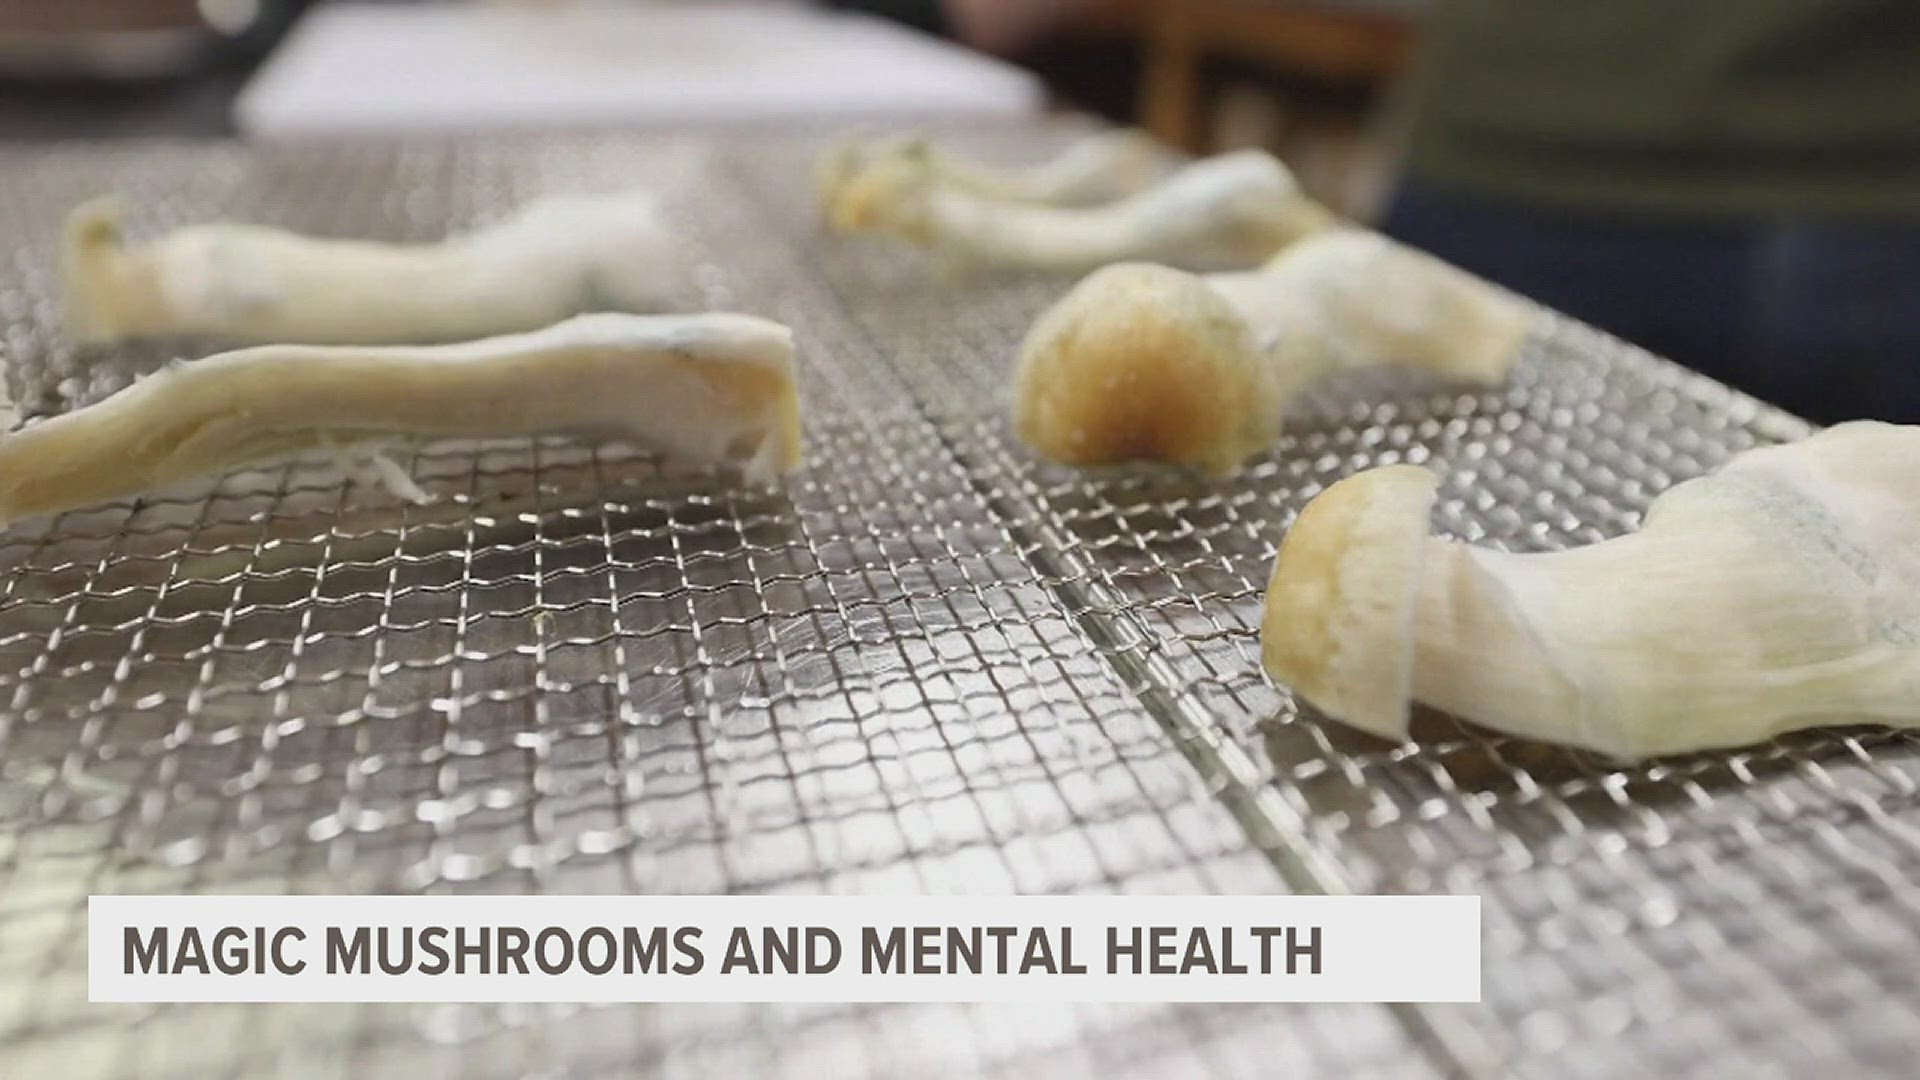 While in many parts of the country magic mushrooms are still illegal, Oregon is opening the door to public use.